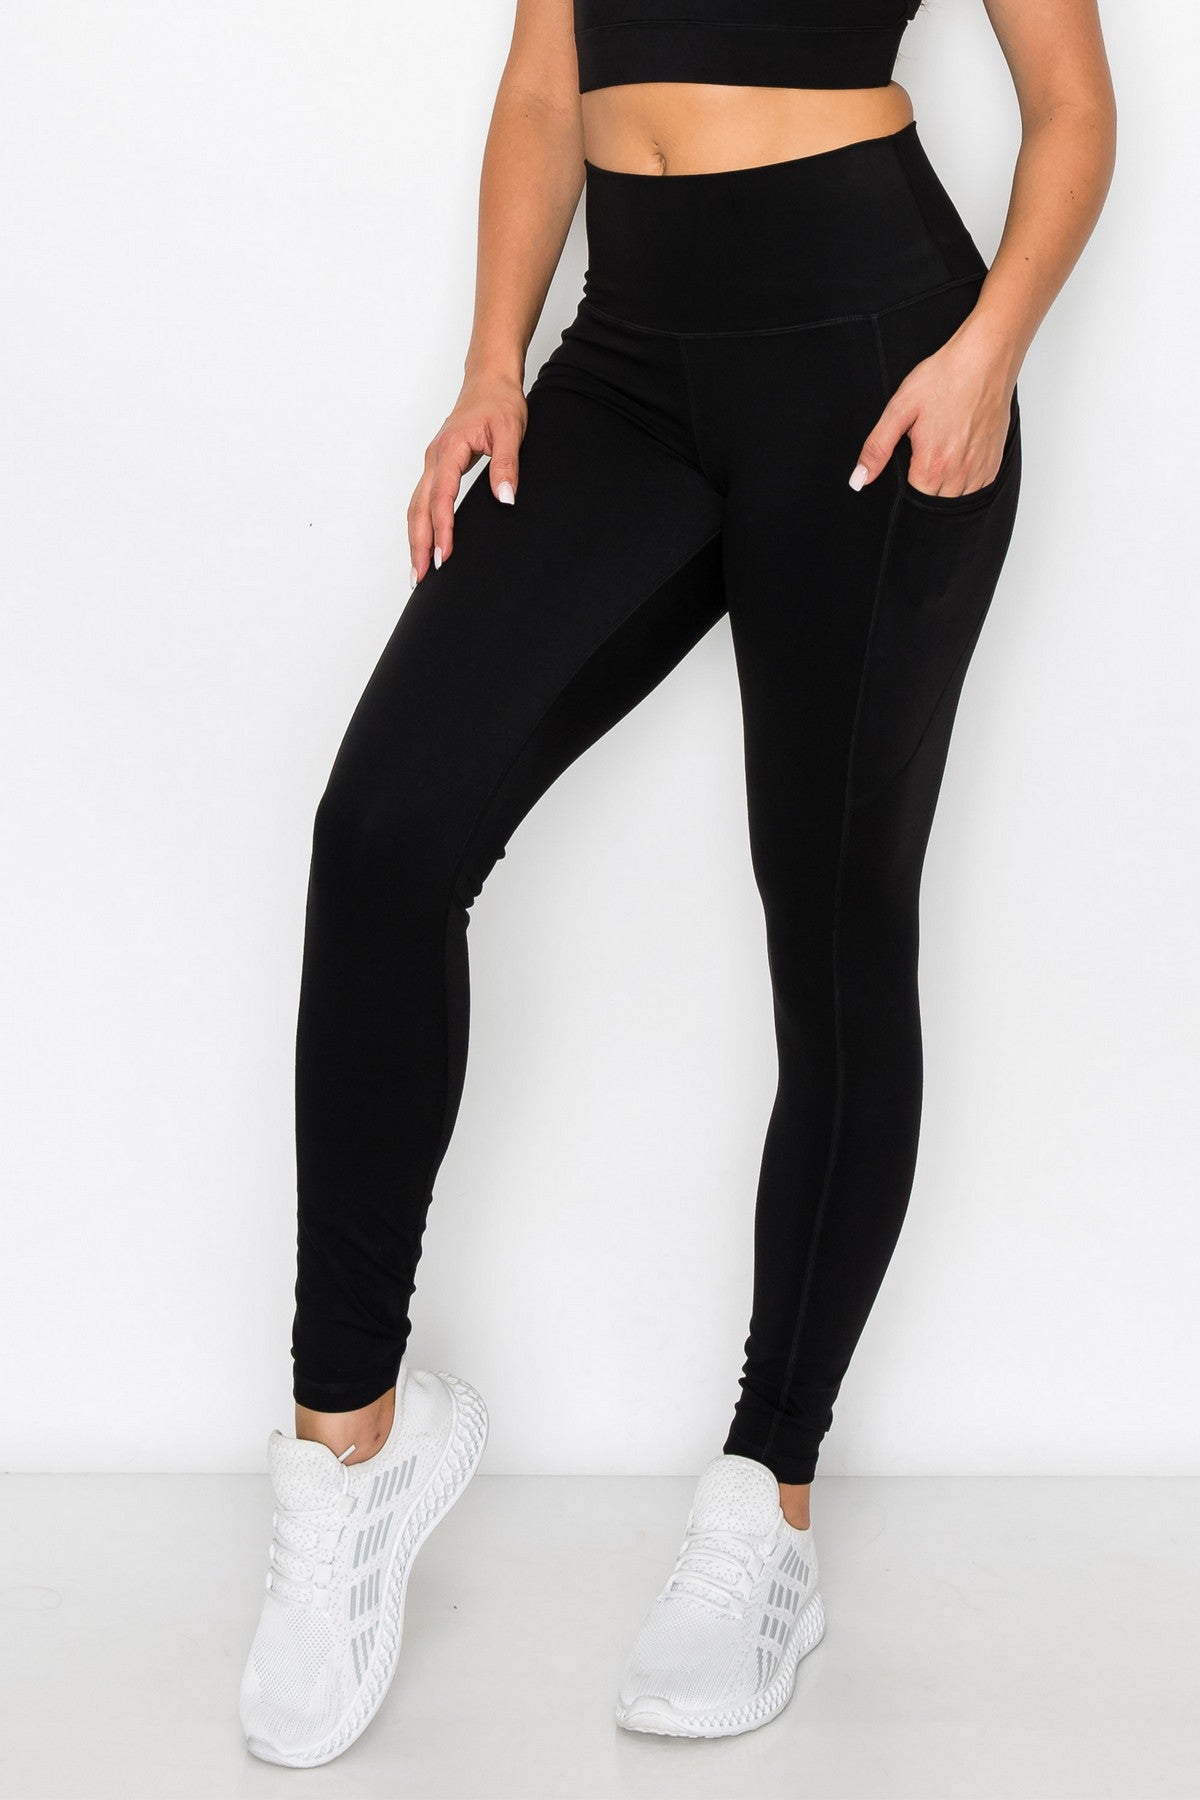 Butter-Soft Pocketed Activewear Leggings - Blk – Blessed Trio Boutique